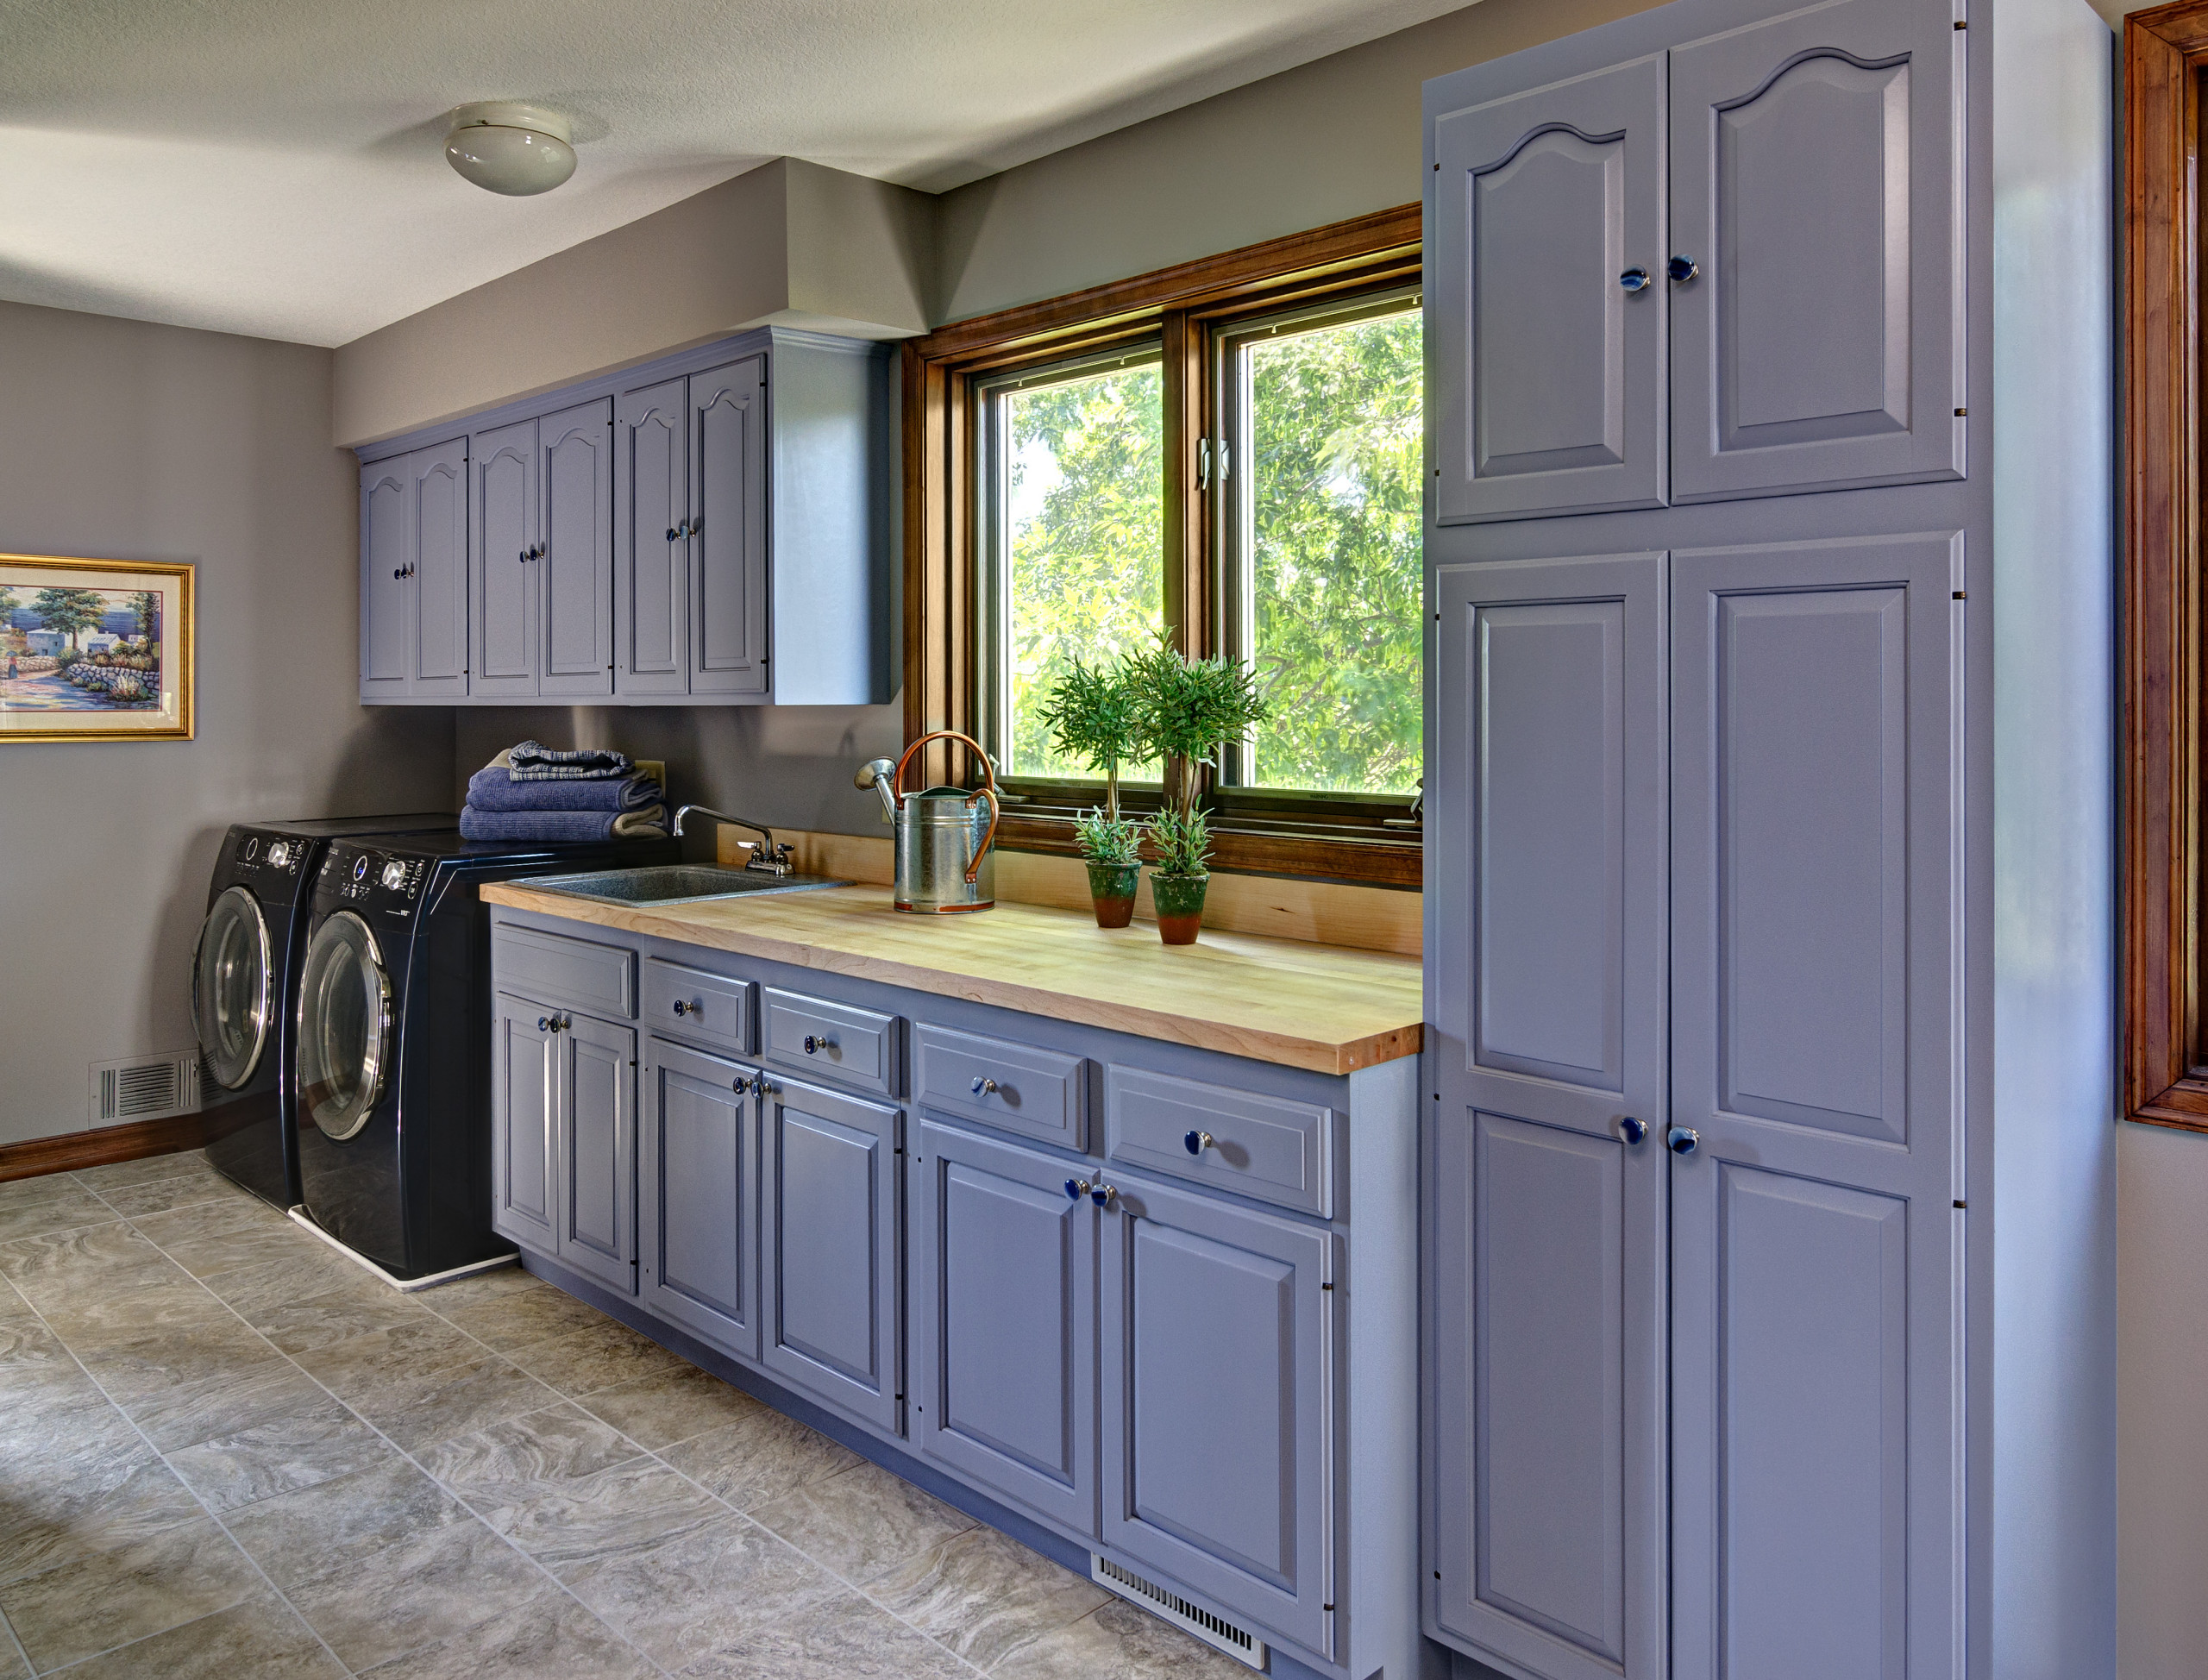 DIY Wood Plank Laundry Room Countertop - Blue i Style